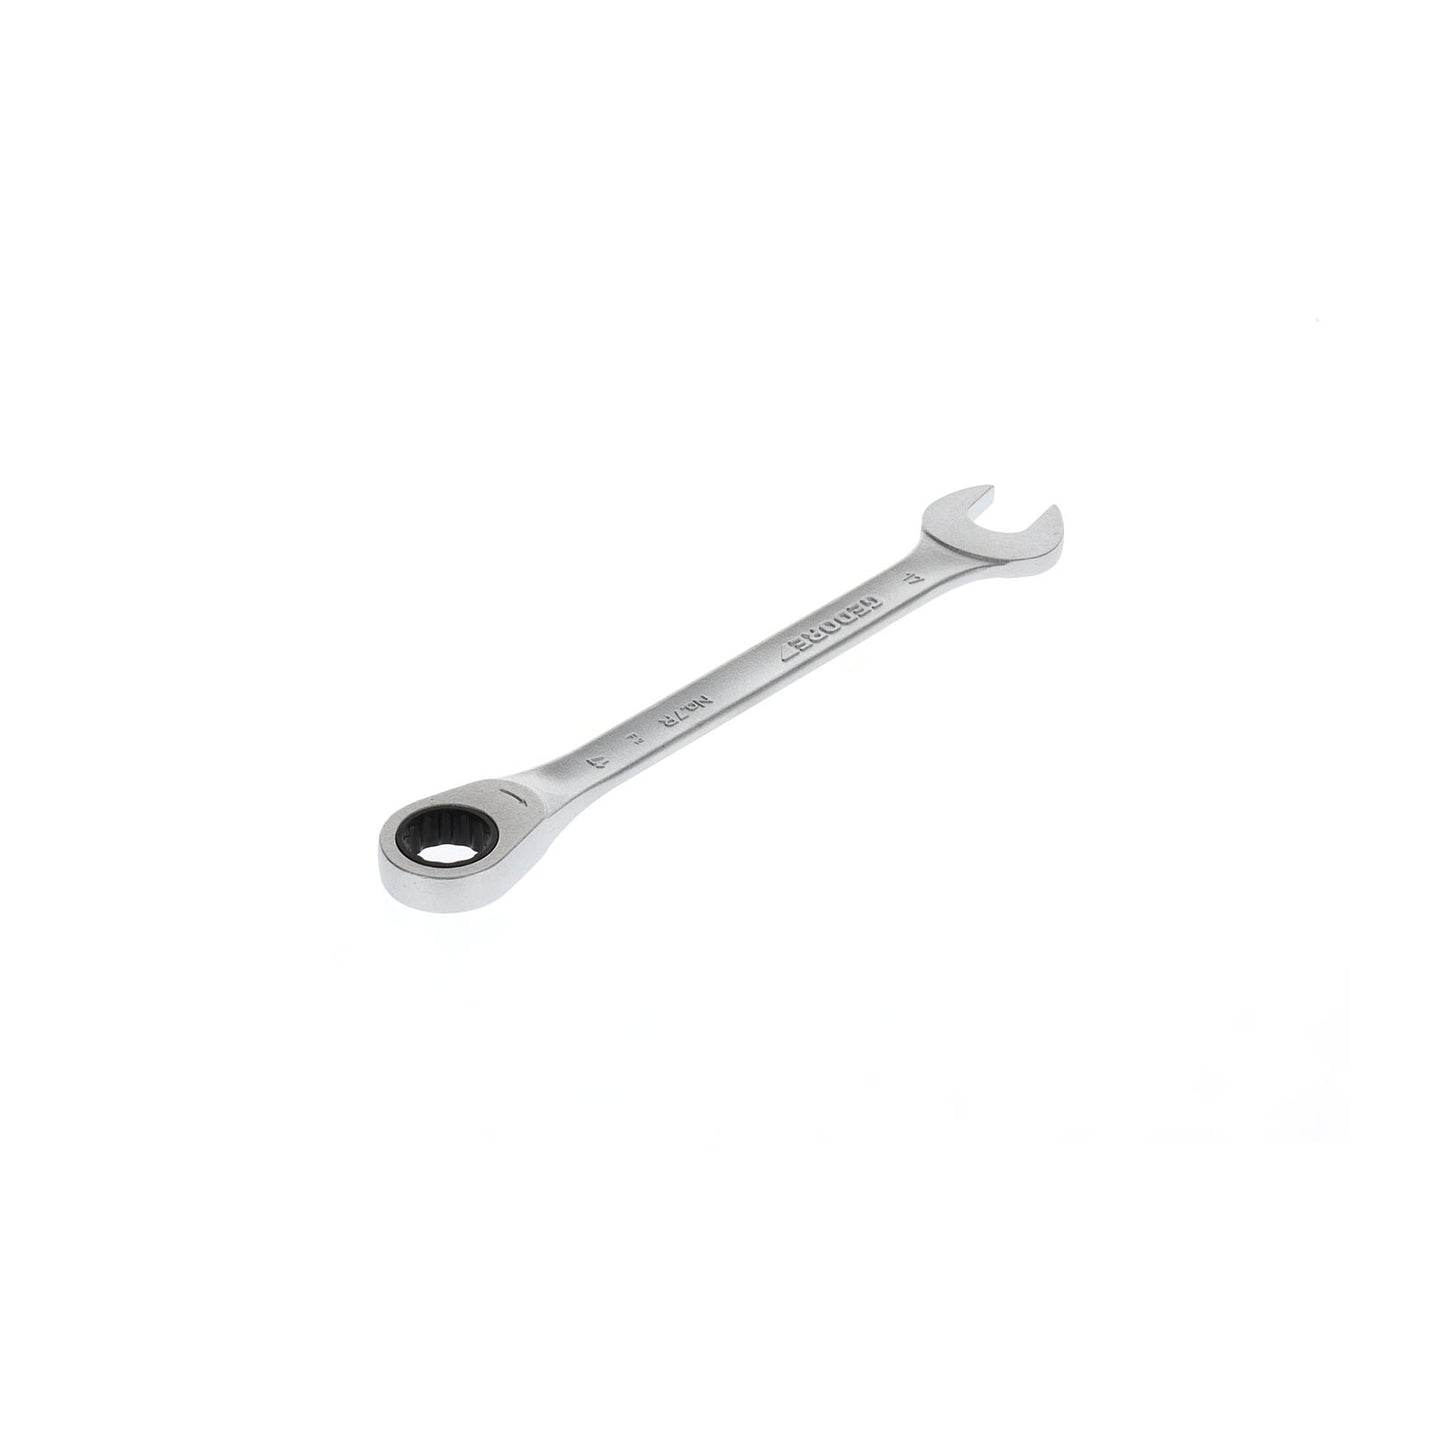 GEDORE 7 R 17 - Ratchet combination wrench, 17mm (2297159)